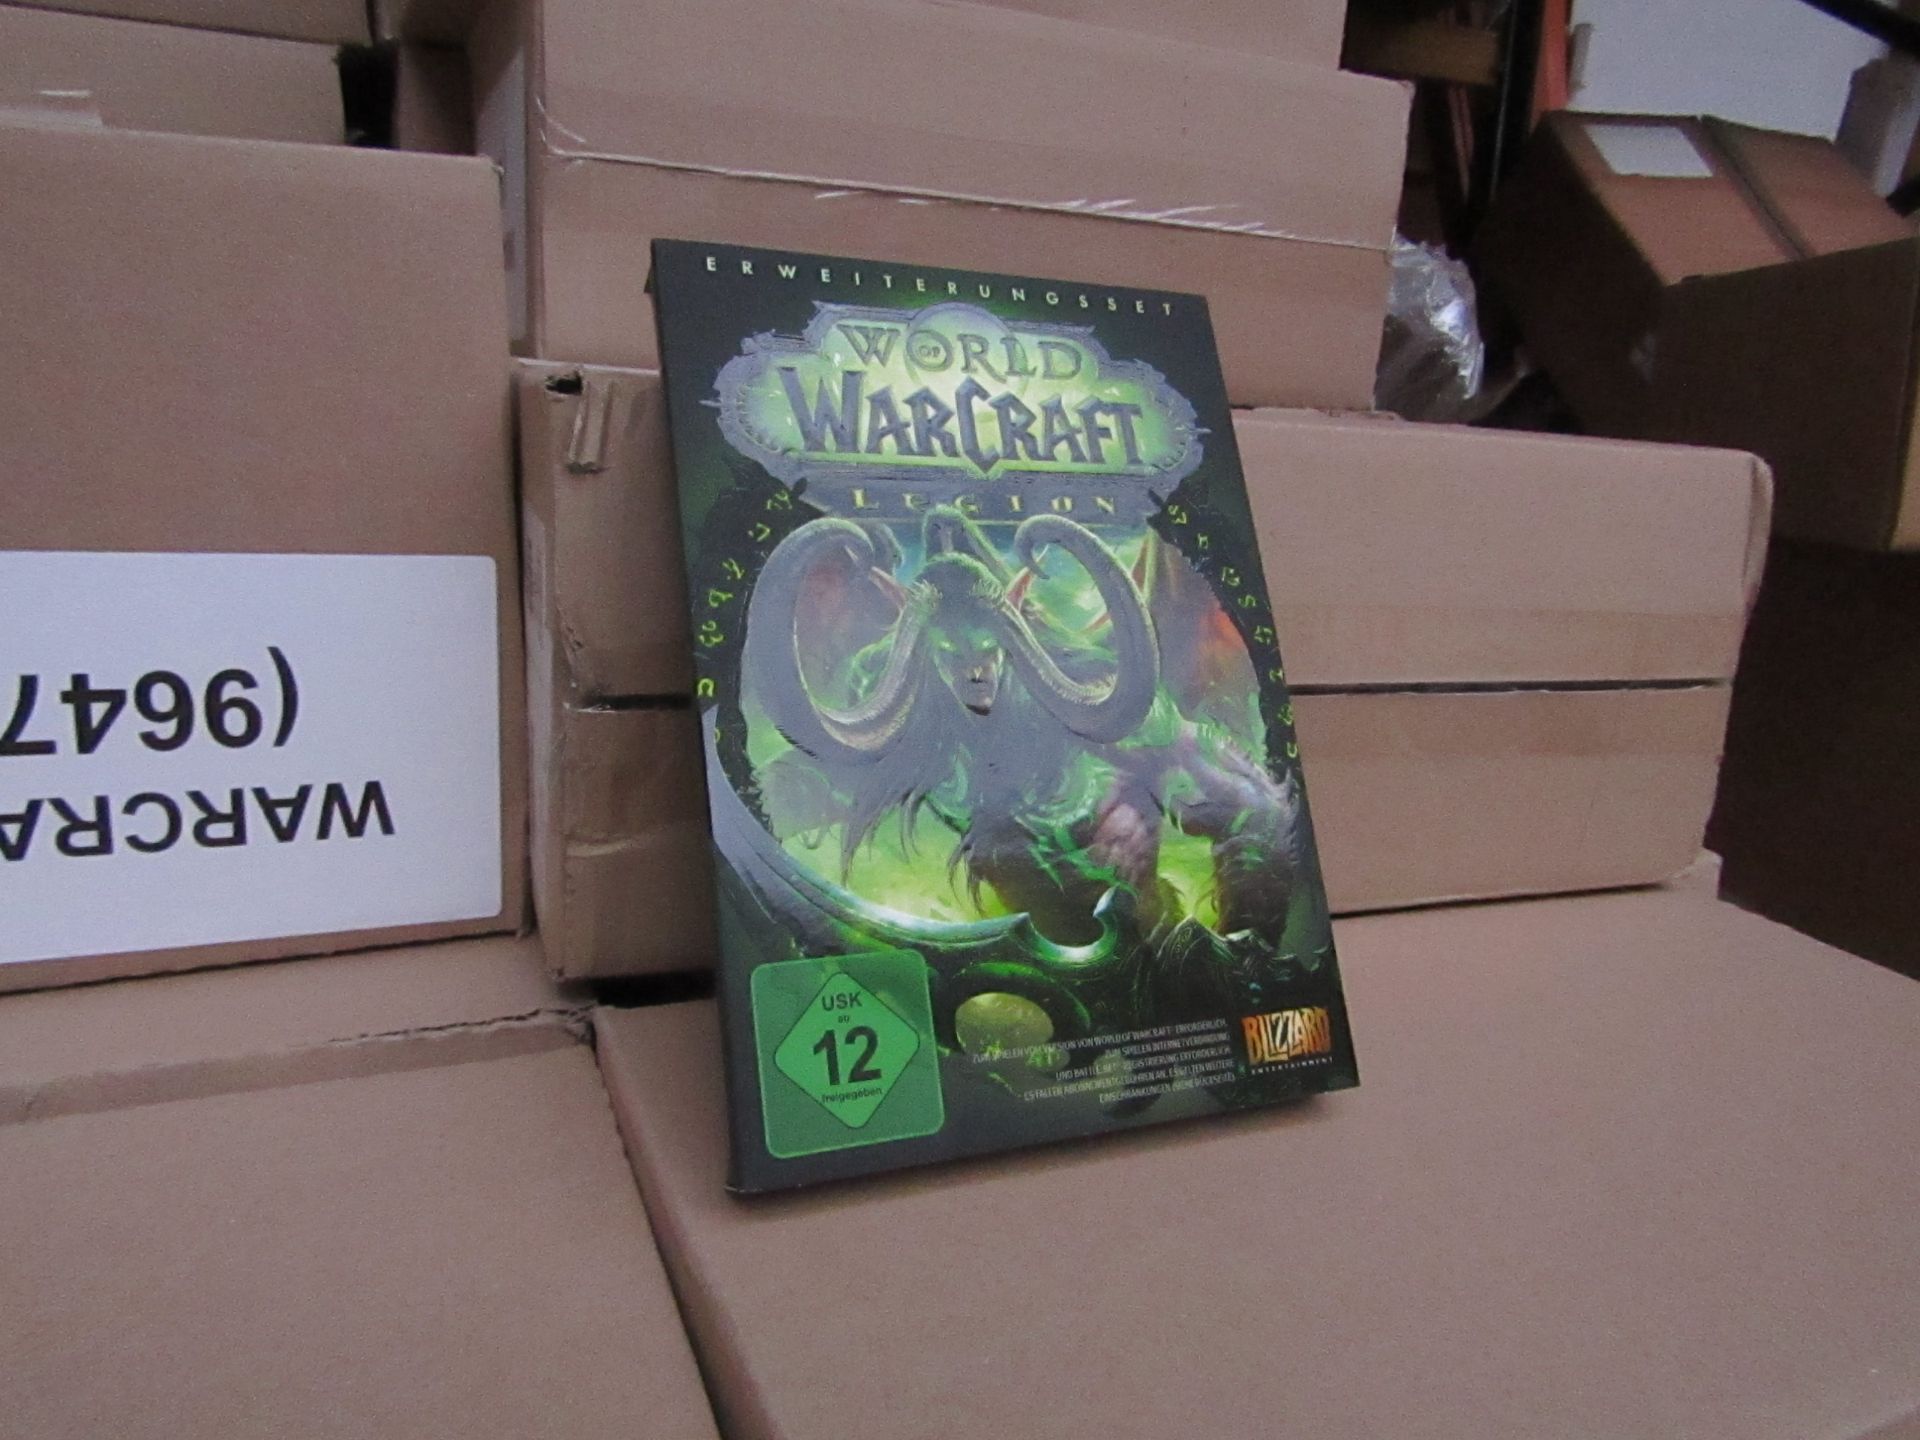 Box of 18x World of Warcraft Legion games, new and still sealed, these games and the packaging are